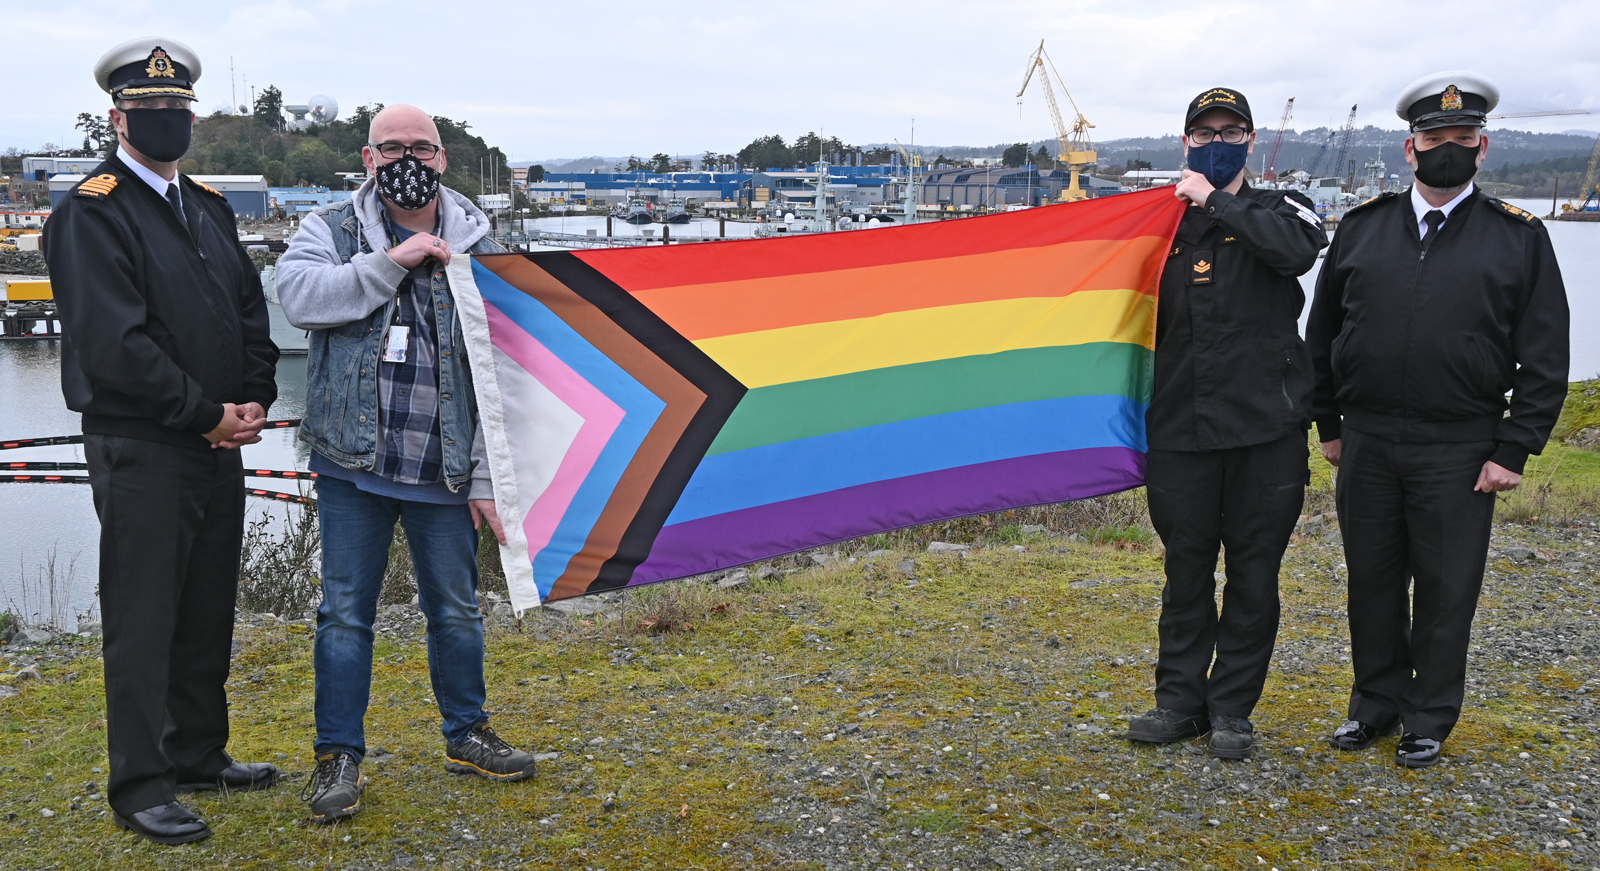 Pictured above: Captain (Navy) Martin Coates, champion of the Defence Team Pride Advisory Organization (DTPAO); Steve Cleugh, Civilian Chair of the DTPAO; Master Sailor Erin Rautenstrauch, Military Chair of the DTPAO; and Chief Petty Officer First Class Al Darragh, Base Chief, hold the Progress Pride Flag that will be raised at CFB Esquimalt for the first time on Saturday, Nov. 20.